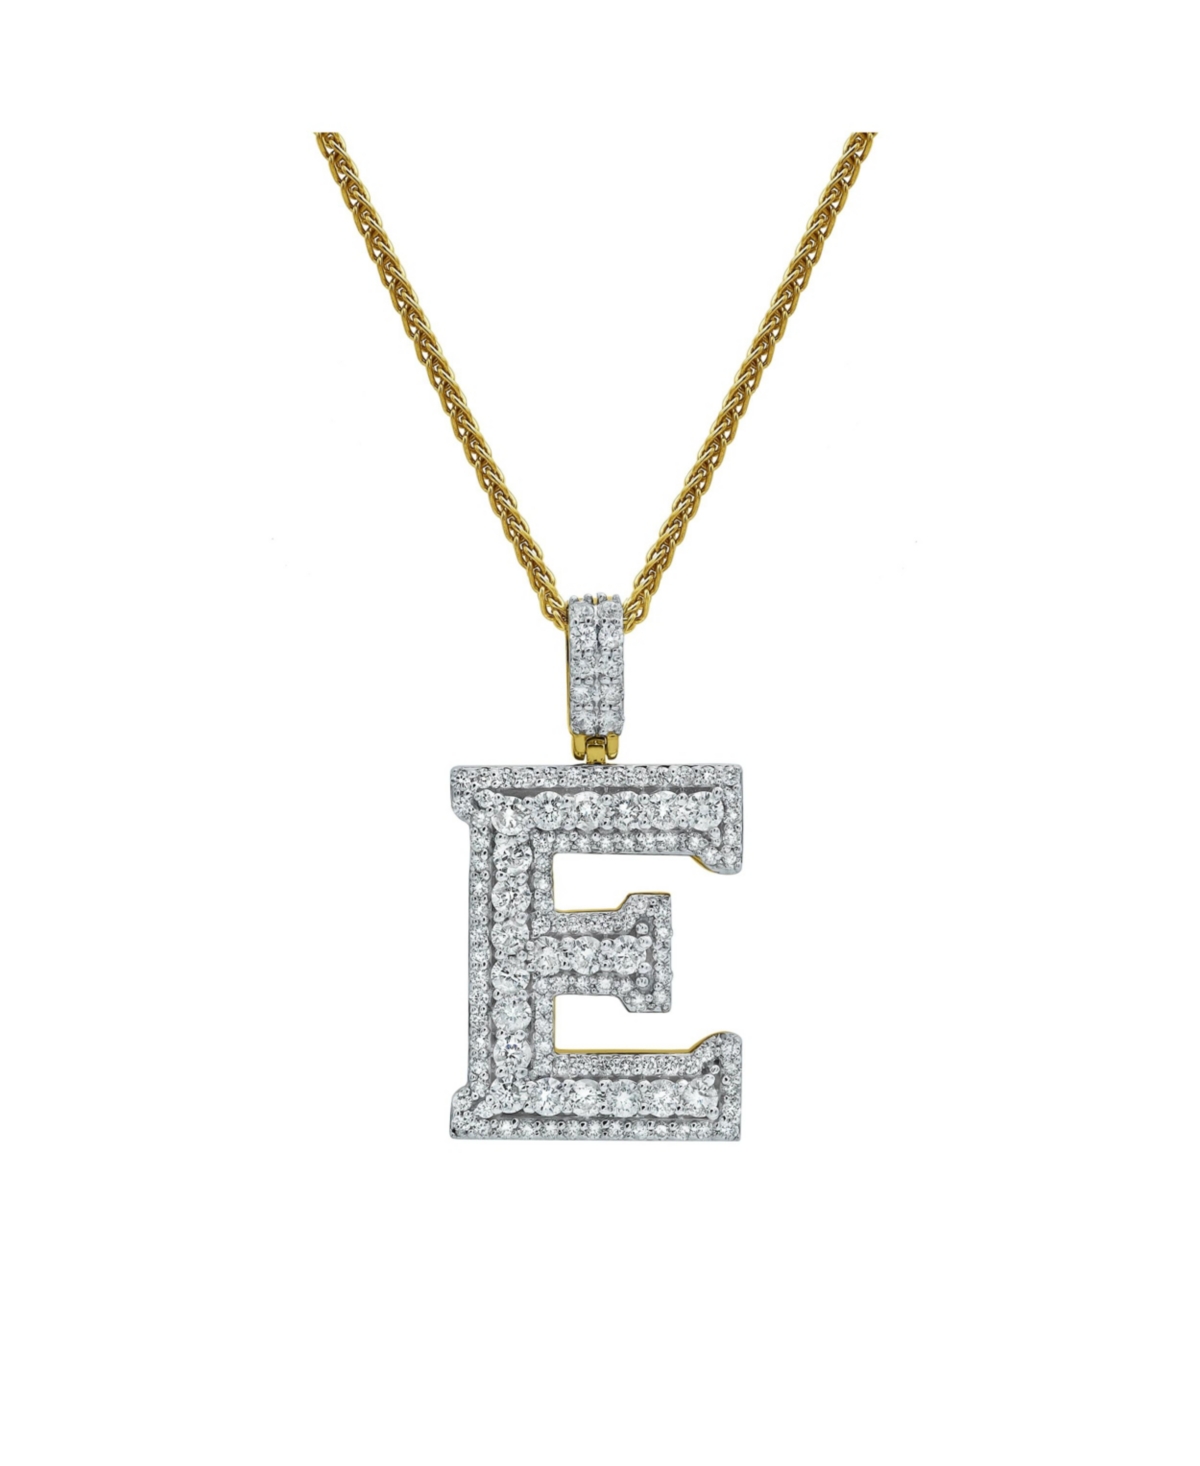 Letter E Natural Round Cut Diamond Pendant (2.4 cttw) in 14k Yellow Gold for Women & Men - Yellow